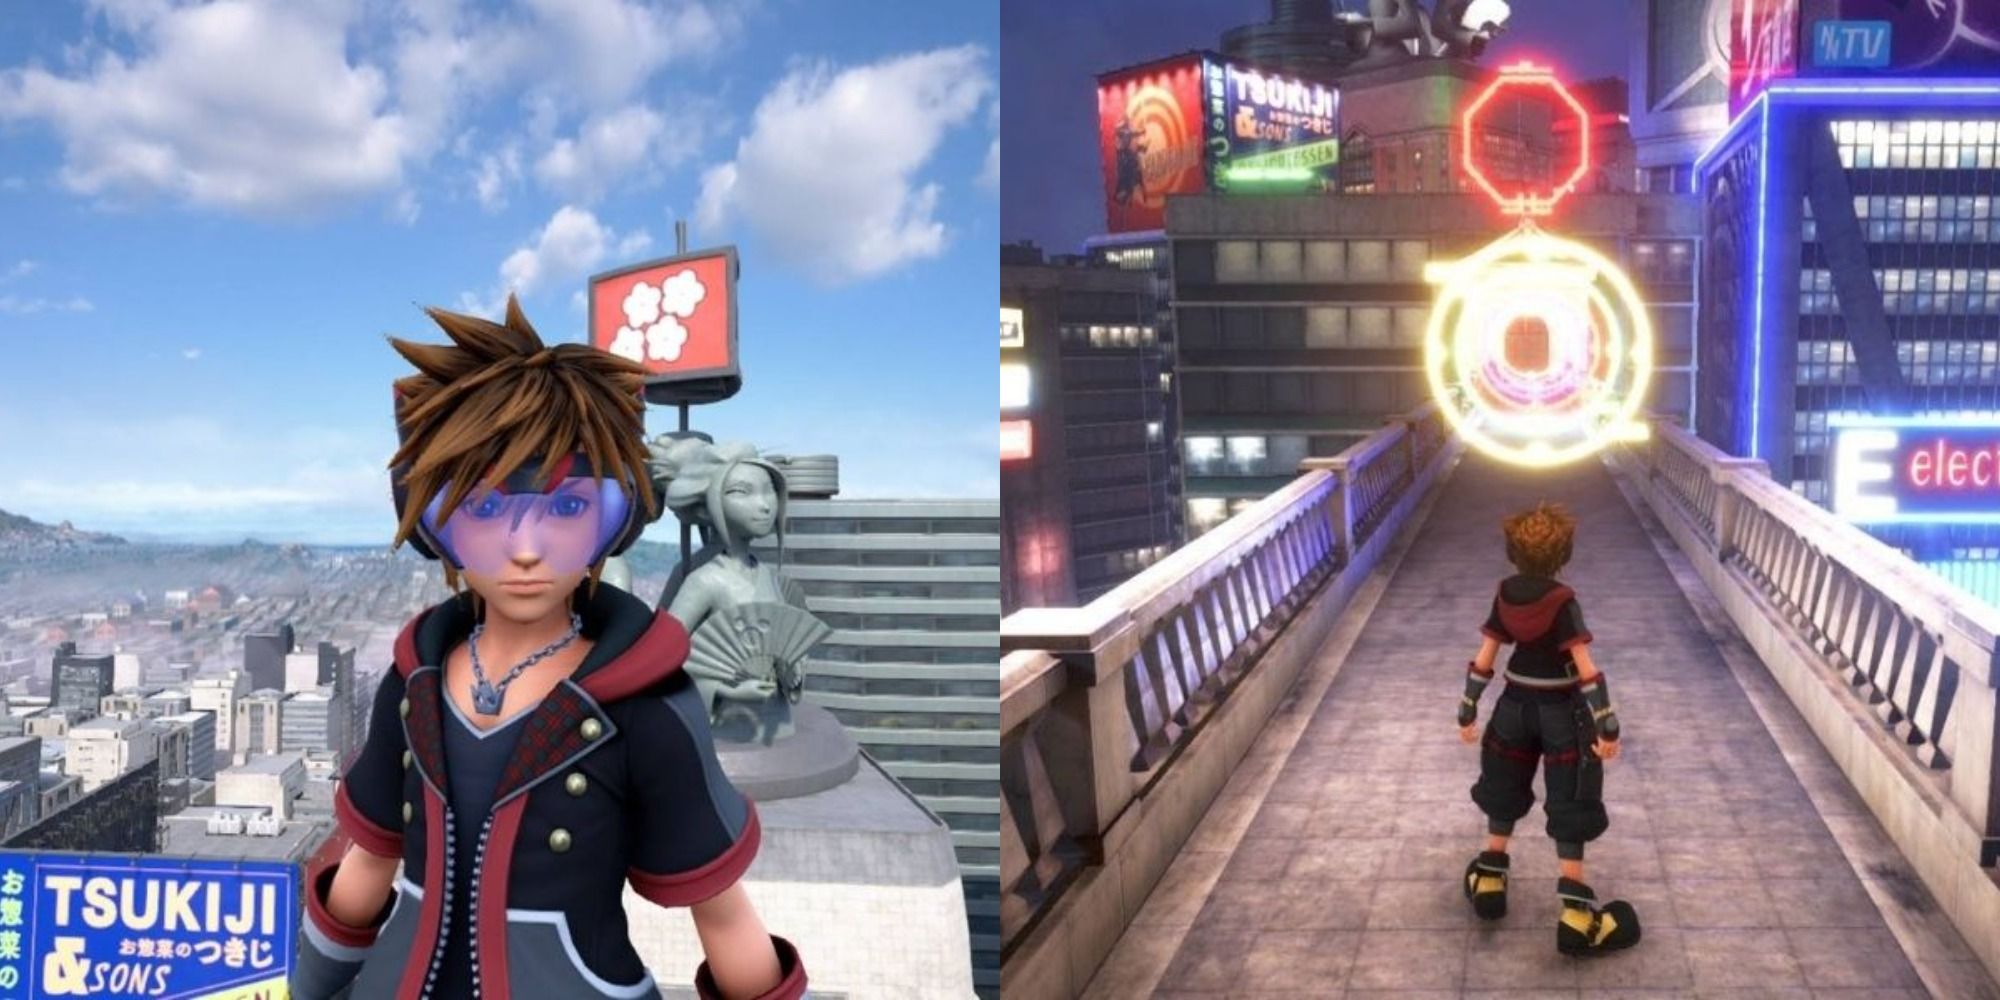 The player standing on a rooftop and approaching an easter egg in the Kingdom Hearts